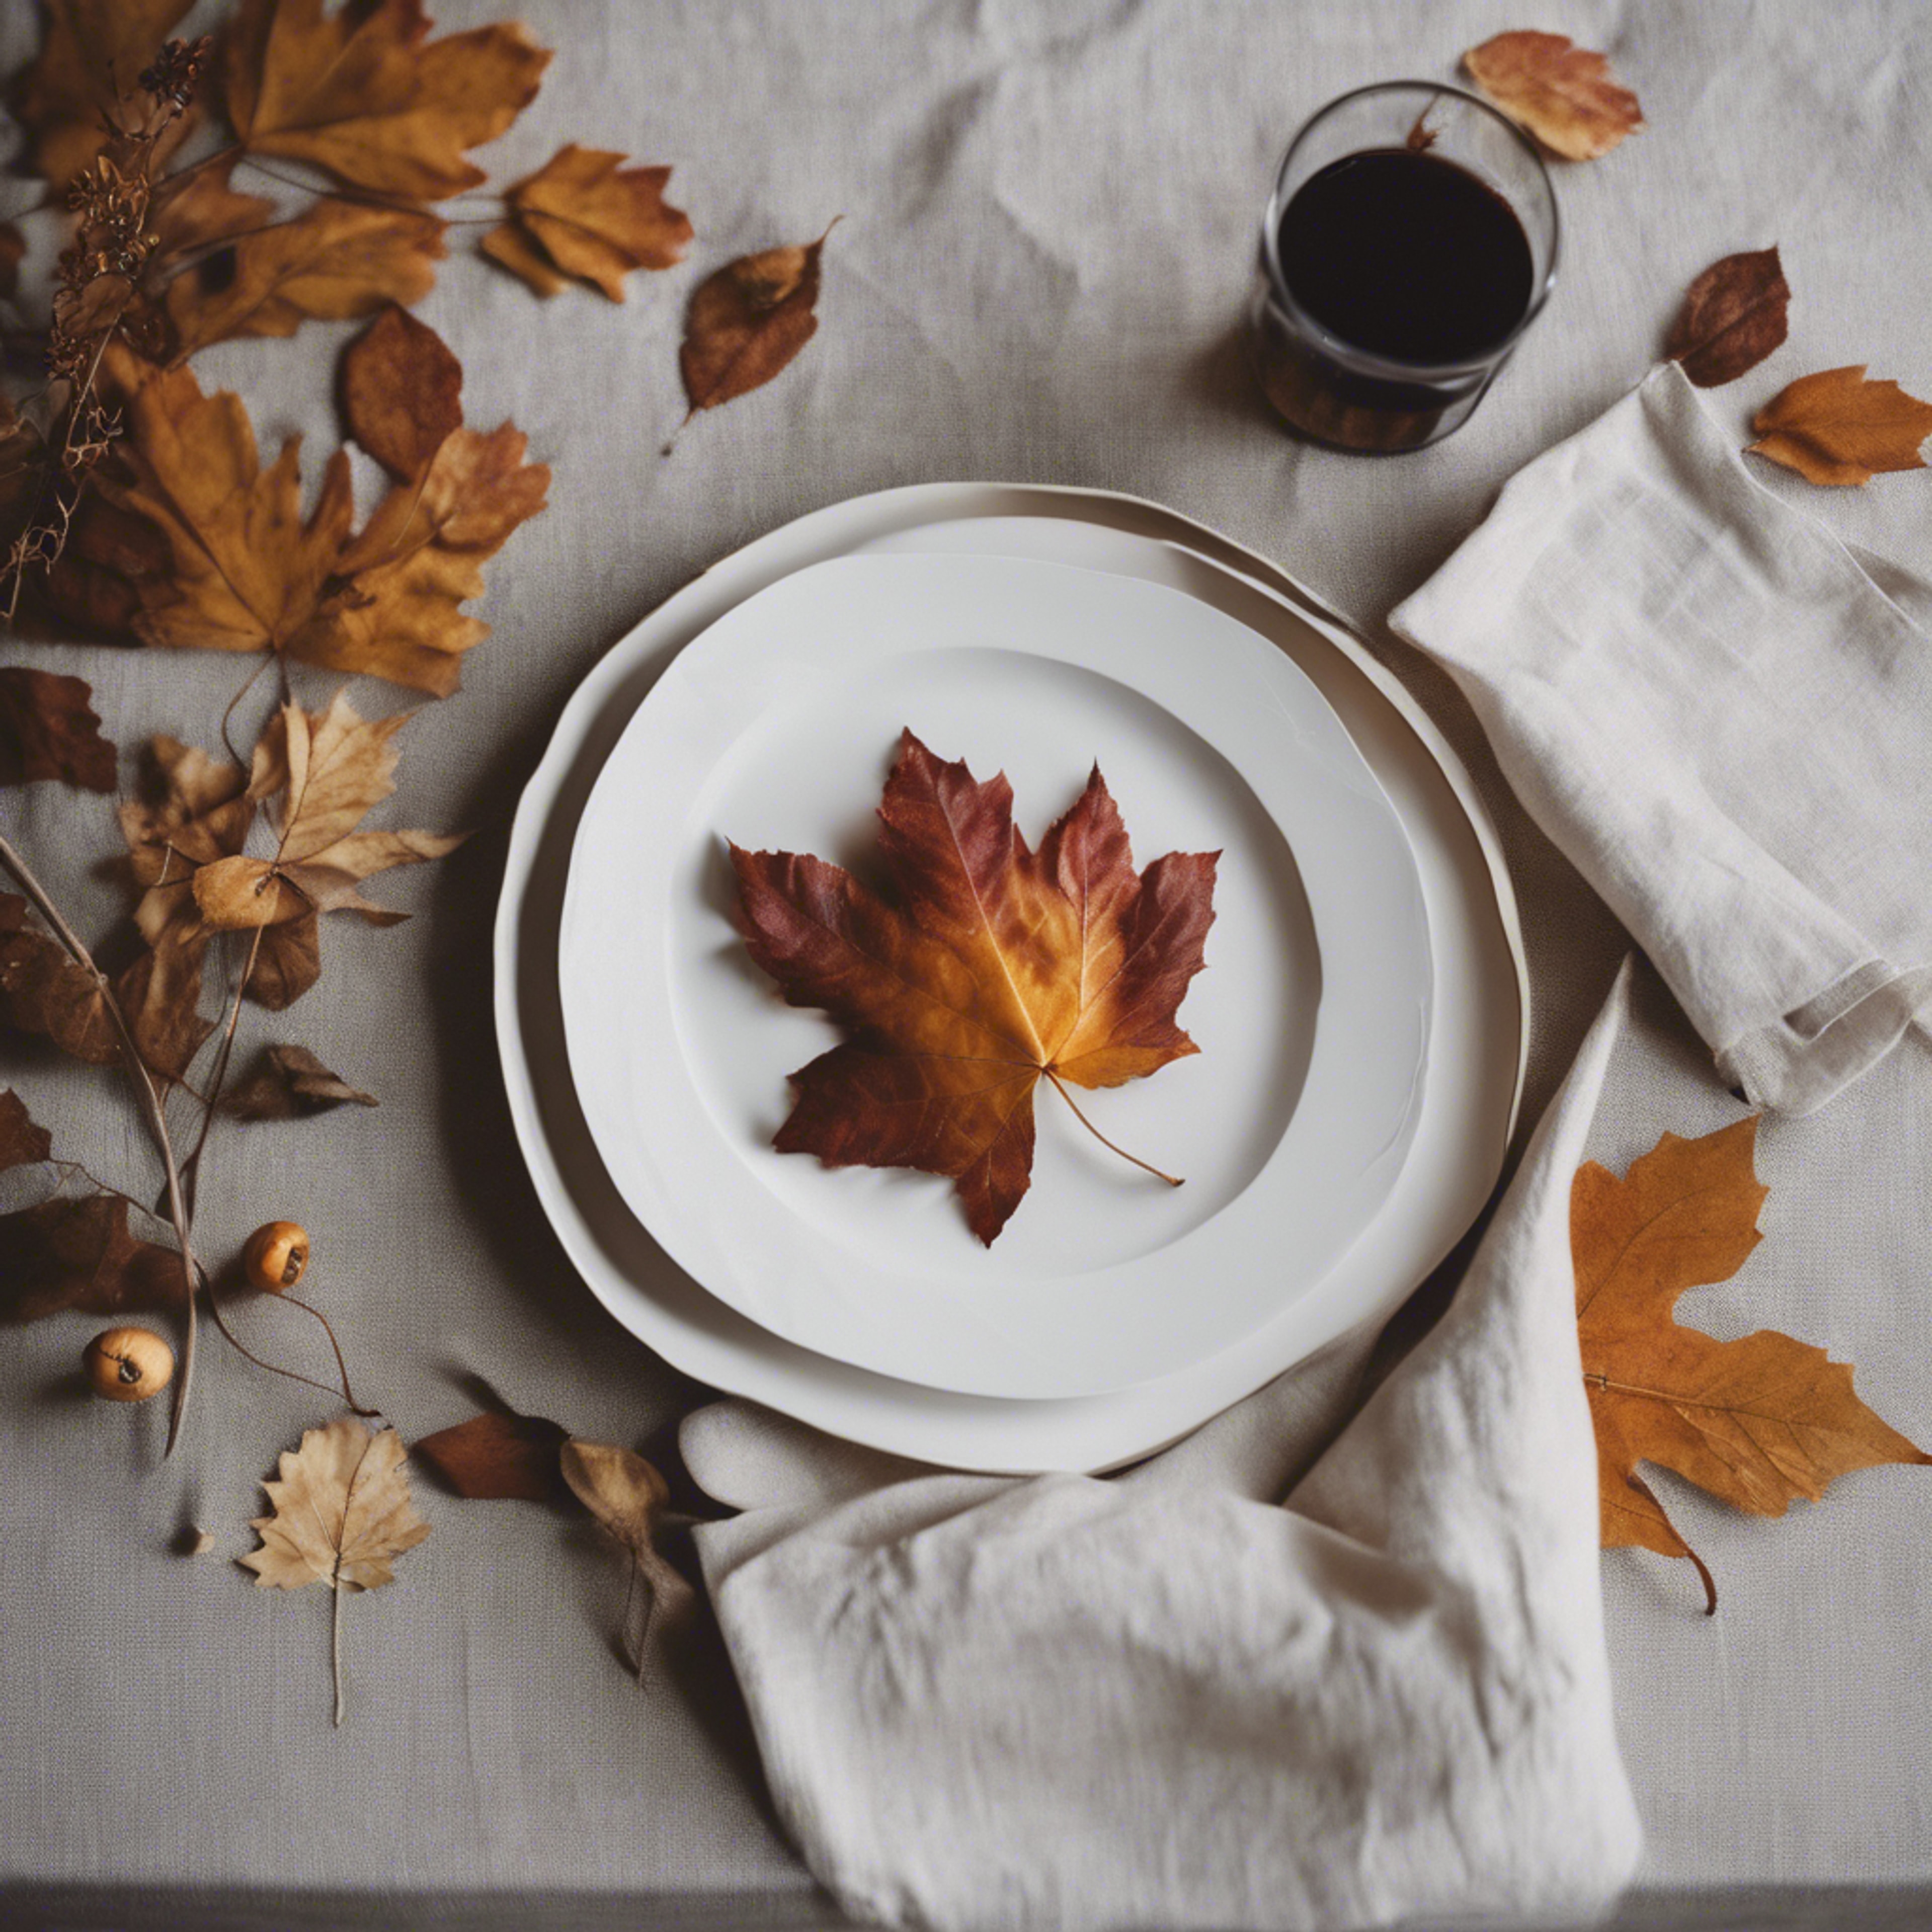 Simplicity-lover's Thanksgiving table decor with minimalistic white plates, natural linen napkins, and a few scattered autumn leaves. Валлпапер[4fdd30c95e164a8e8309]